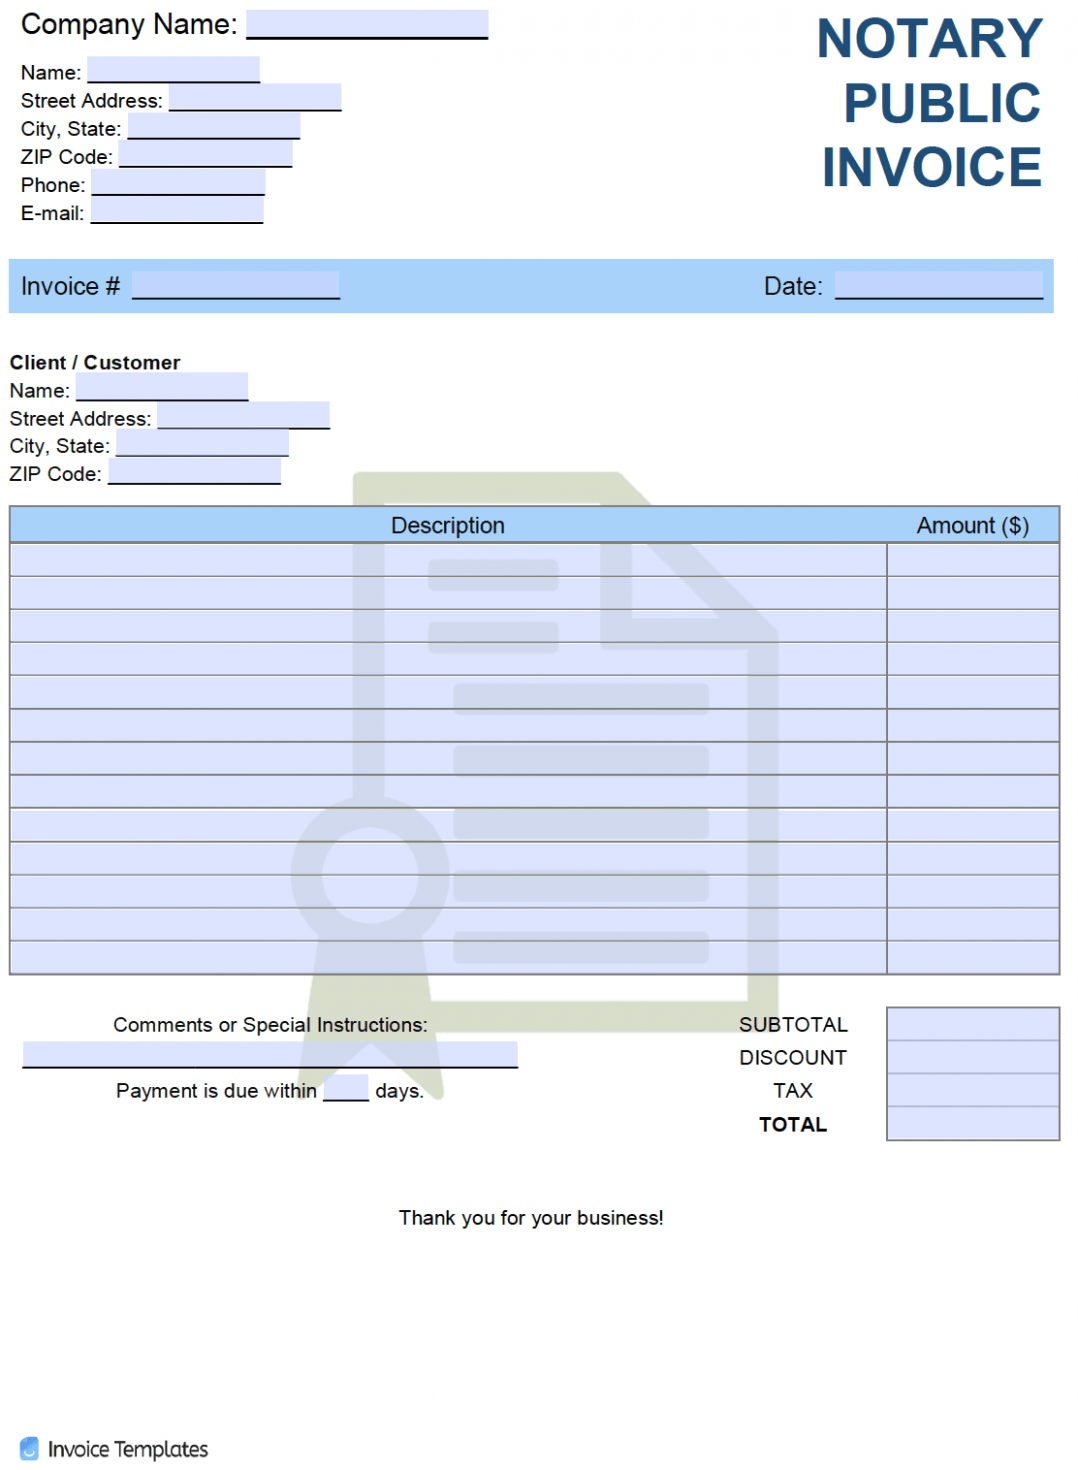 Printable Notary Receipt Template PPT